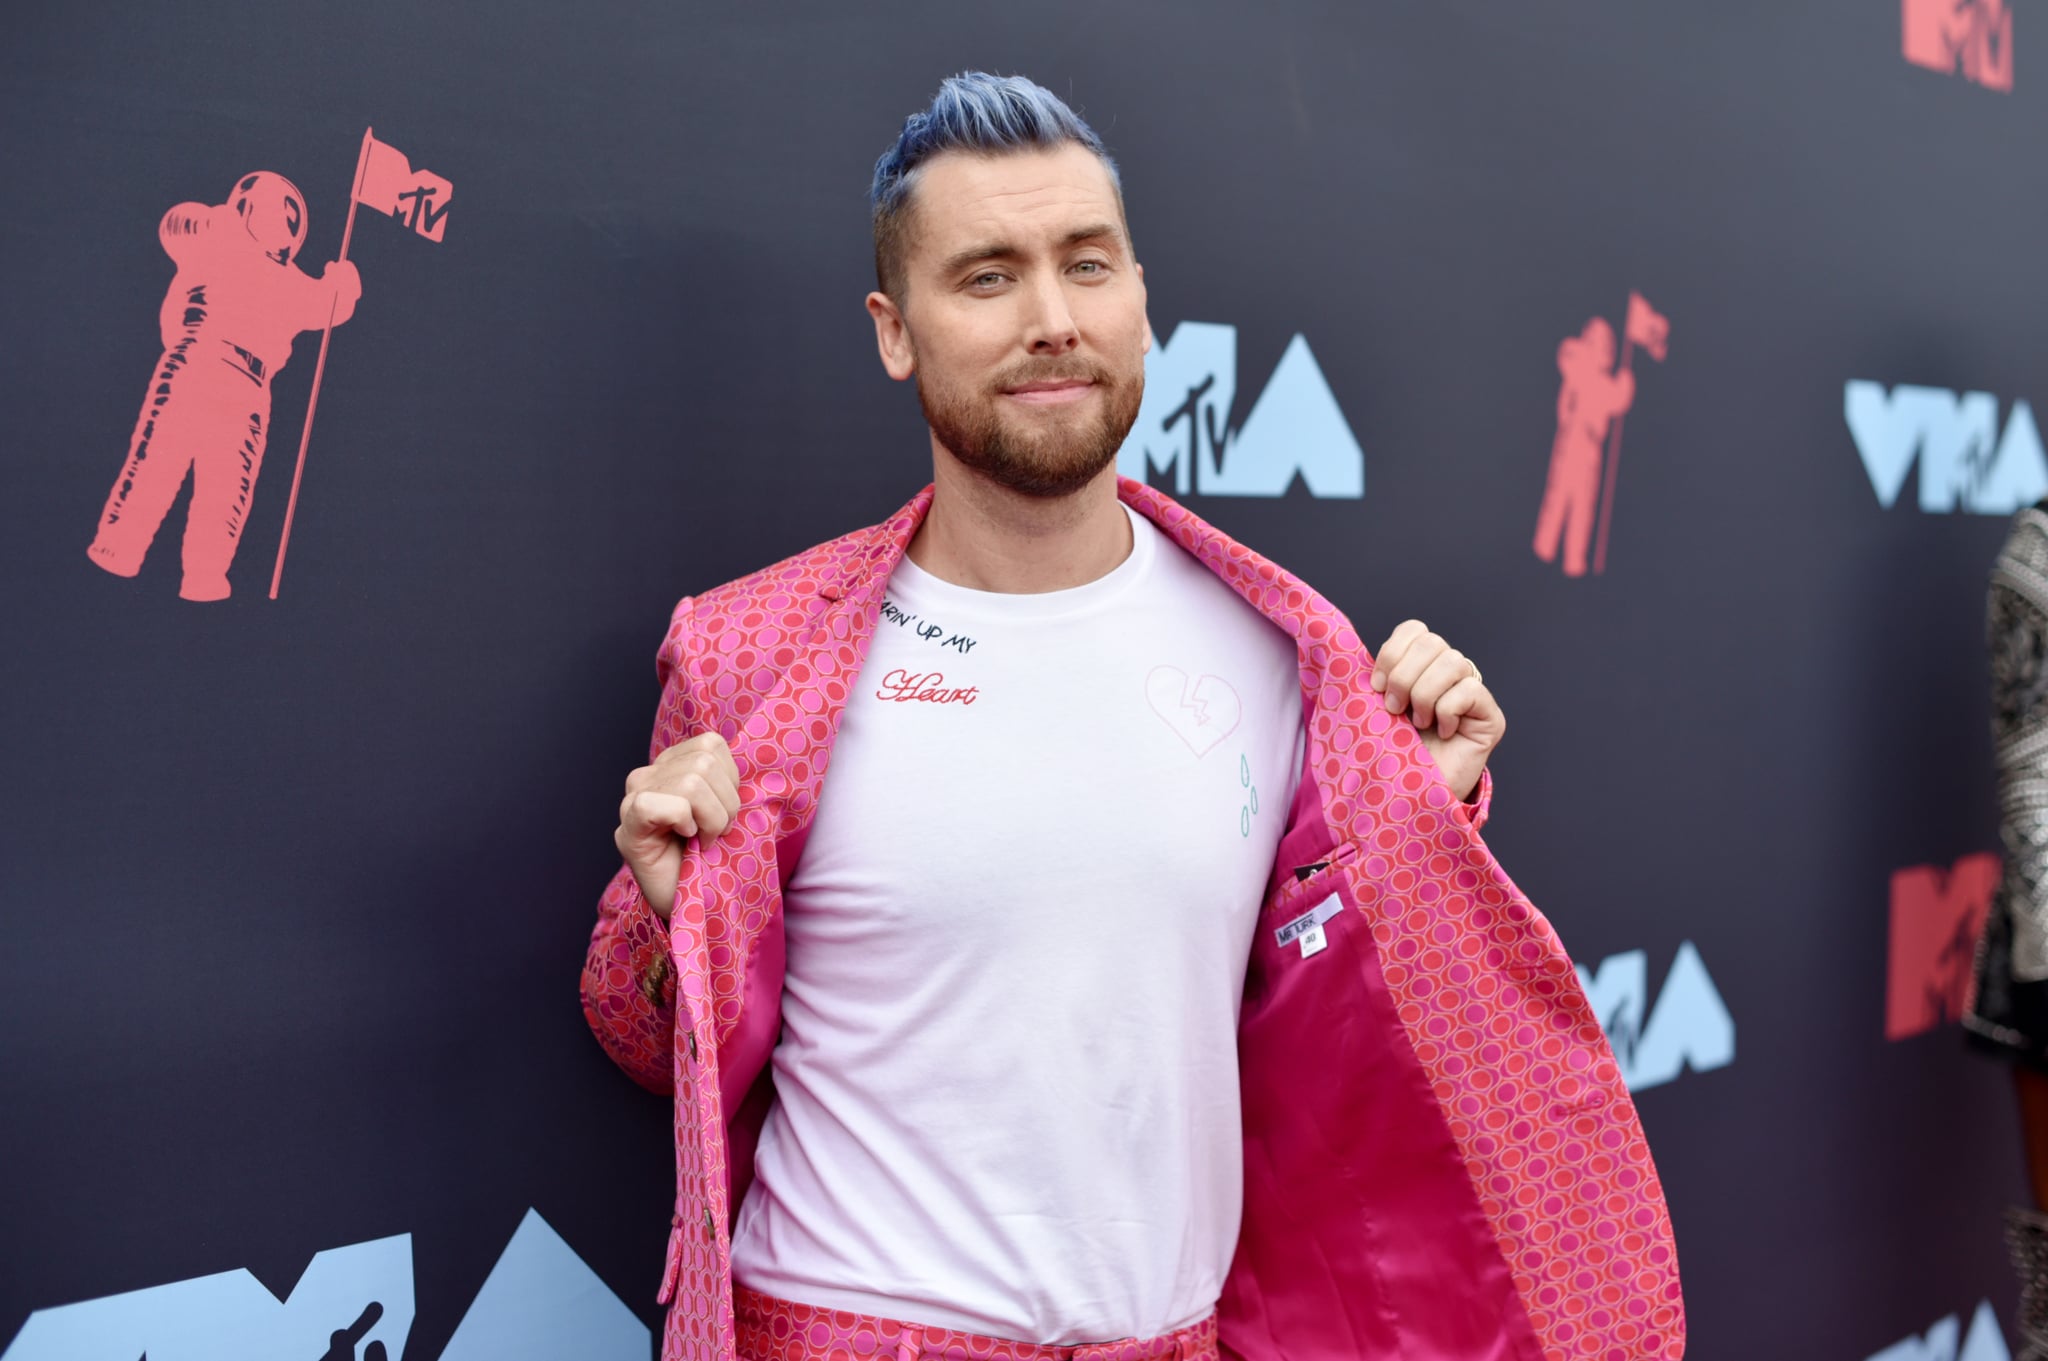 NEWARK, NEW JERSEY - AUGUST 26: Lance Bass attends the 2019 MTV Video Music Awards at Prudential Center on August 26, 2019 in Newark, New Jersey. (Photo by John Shearer/Getty Images)